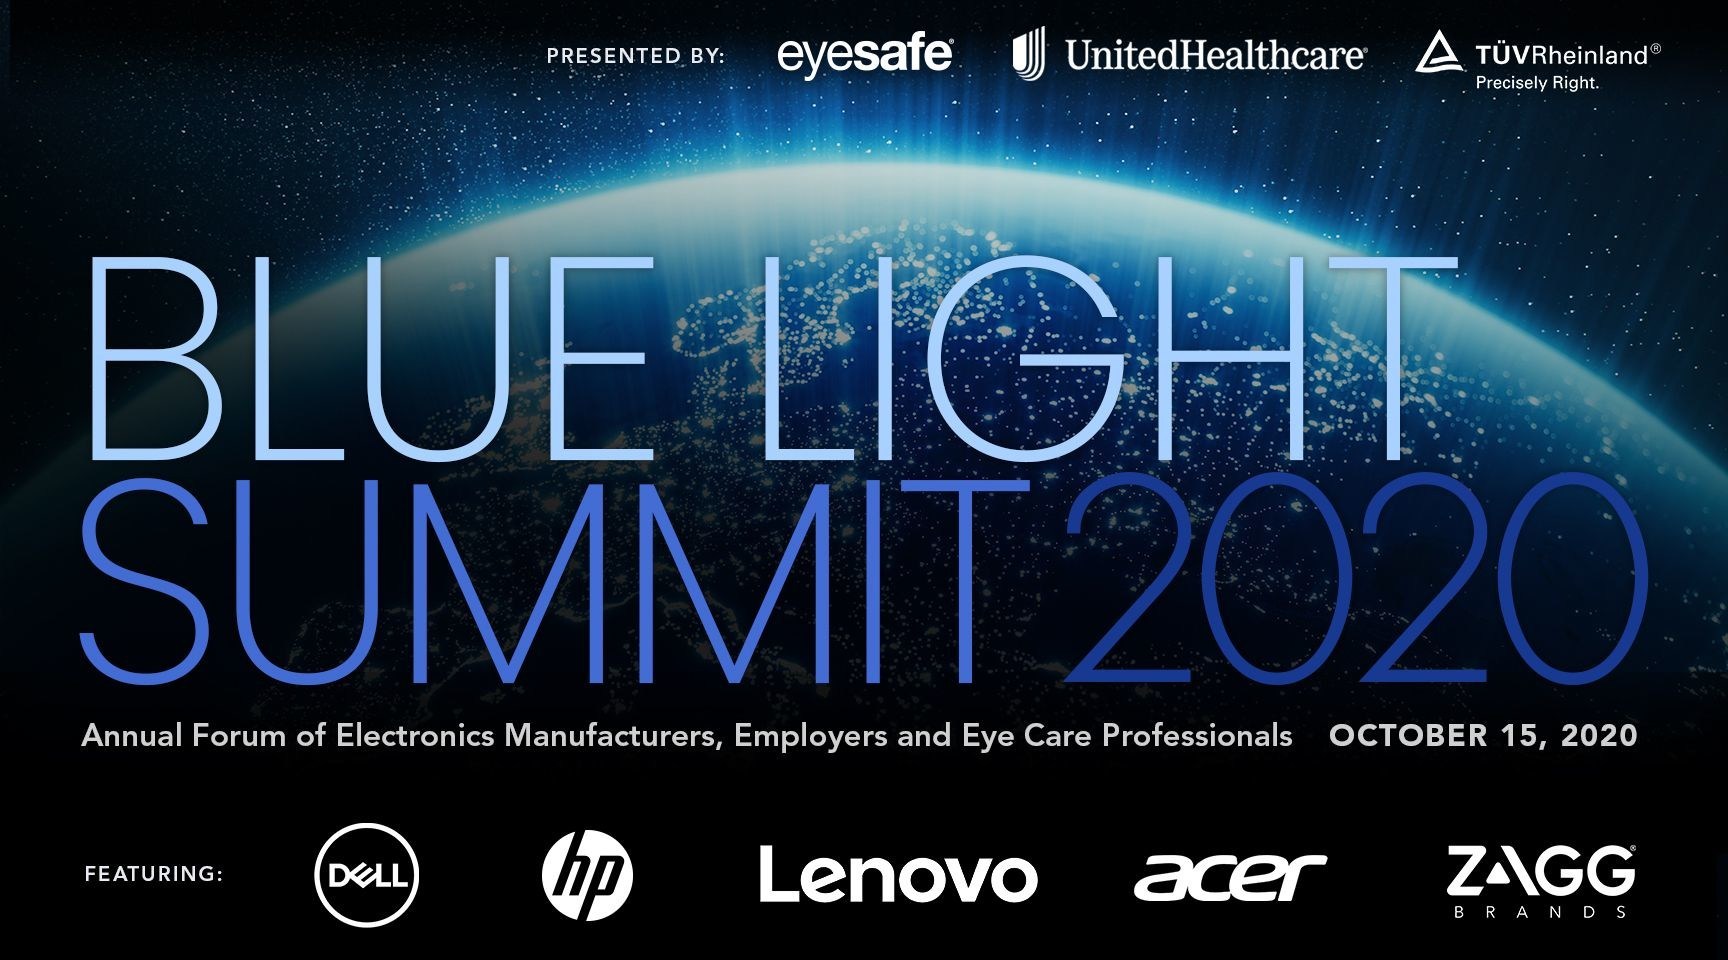 Dell, HP, Lenovo and Acer to Announce New Eyesafe Products at the Blue Light Summit 2020 Presented by UnitedHealthcare, Eyesafe and TÜV Rheinland